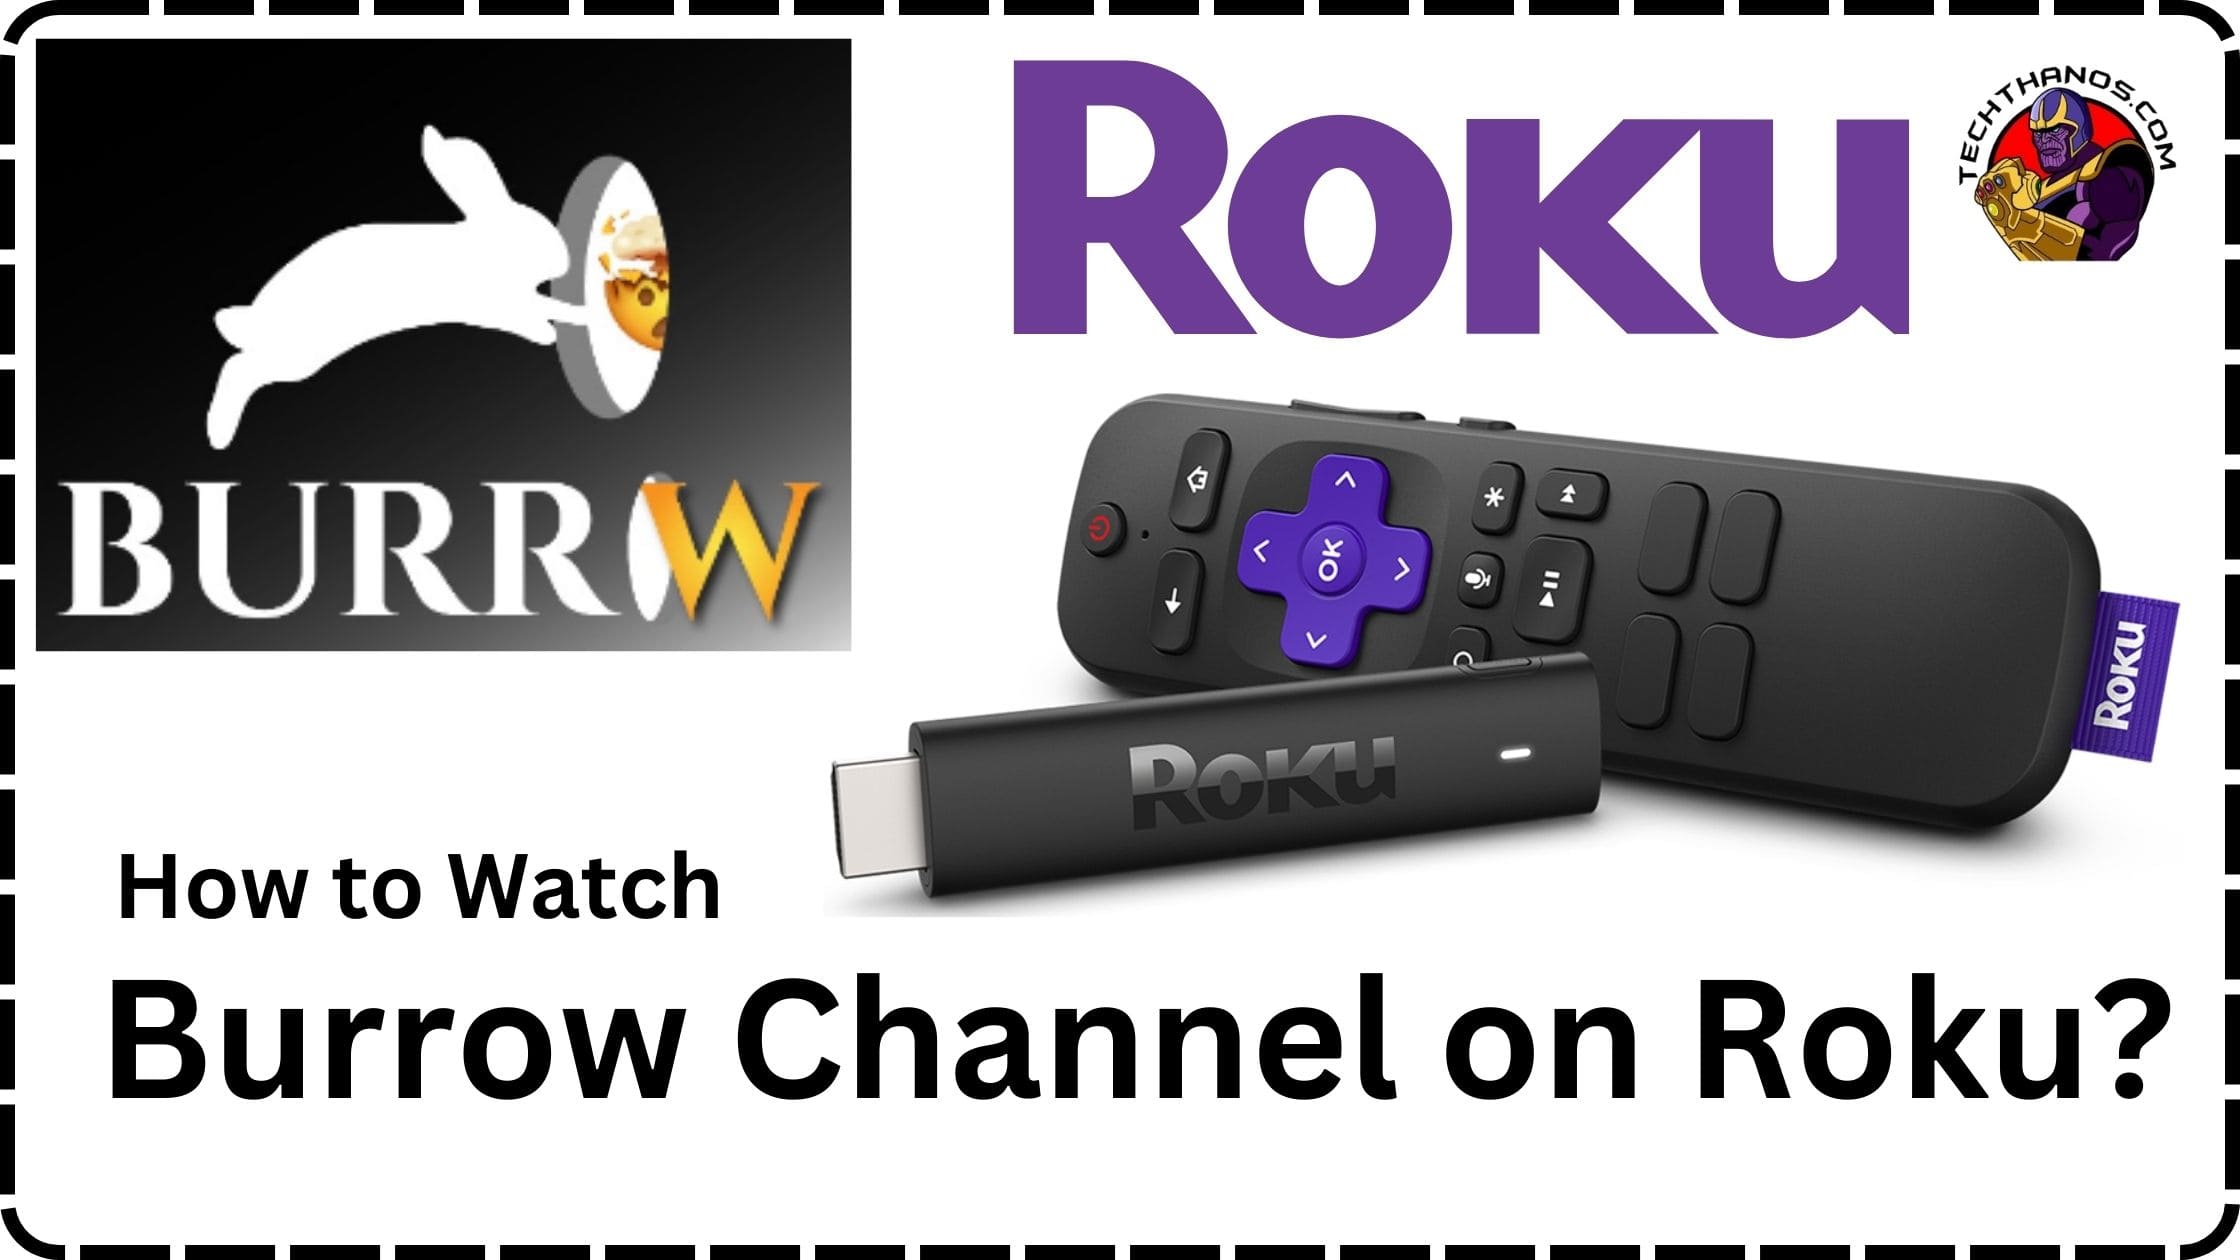 How to watch the Burrow channel on Roku?